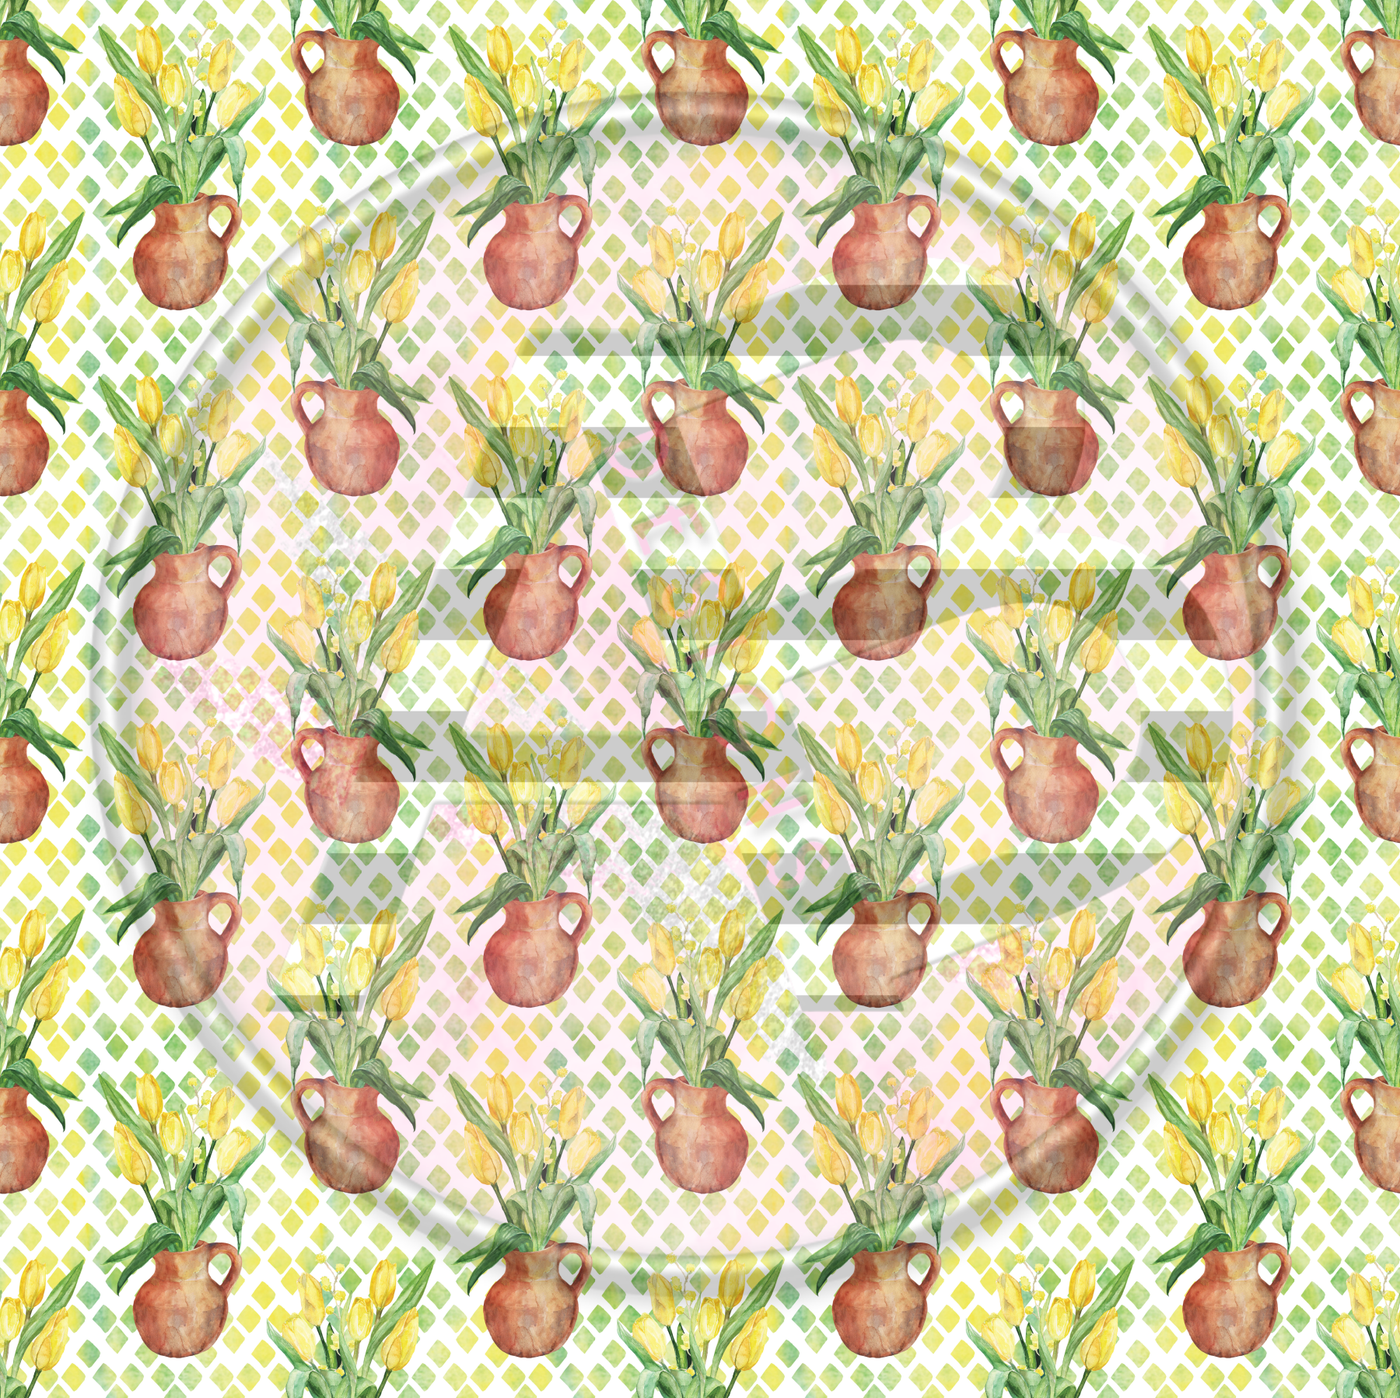 Adhesive Patterned Vinyl - Tulips 03 Smaller